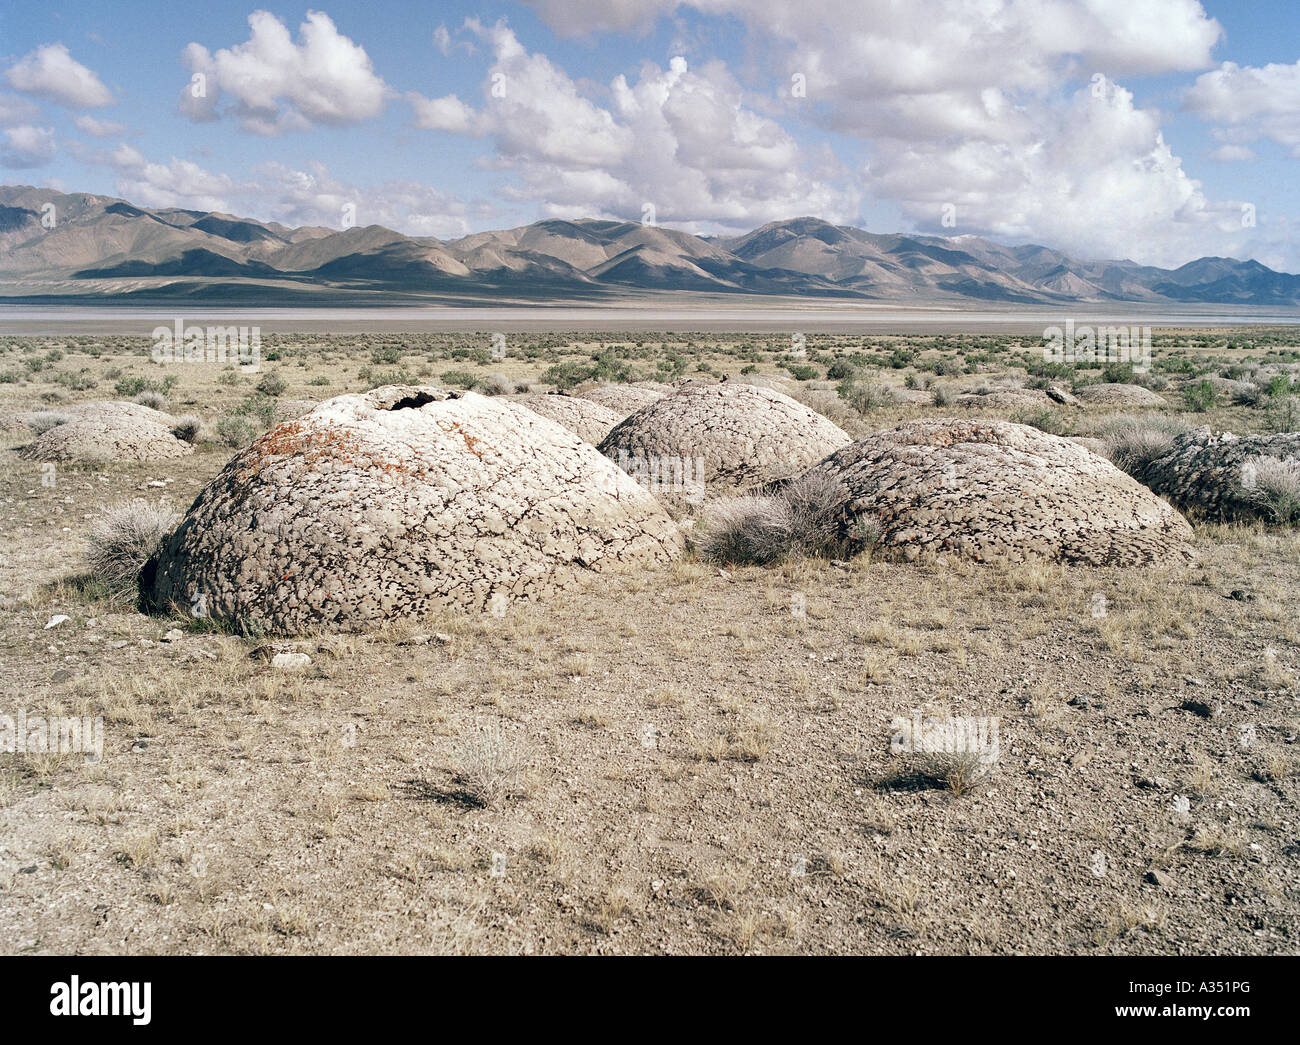 USA Nevada Tufa formations made of calcium carbonate deposits south of Gerlach Nevada Stock Photo